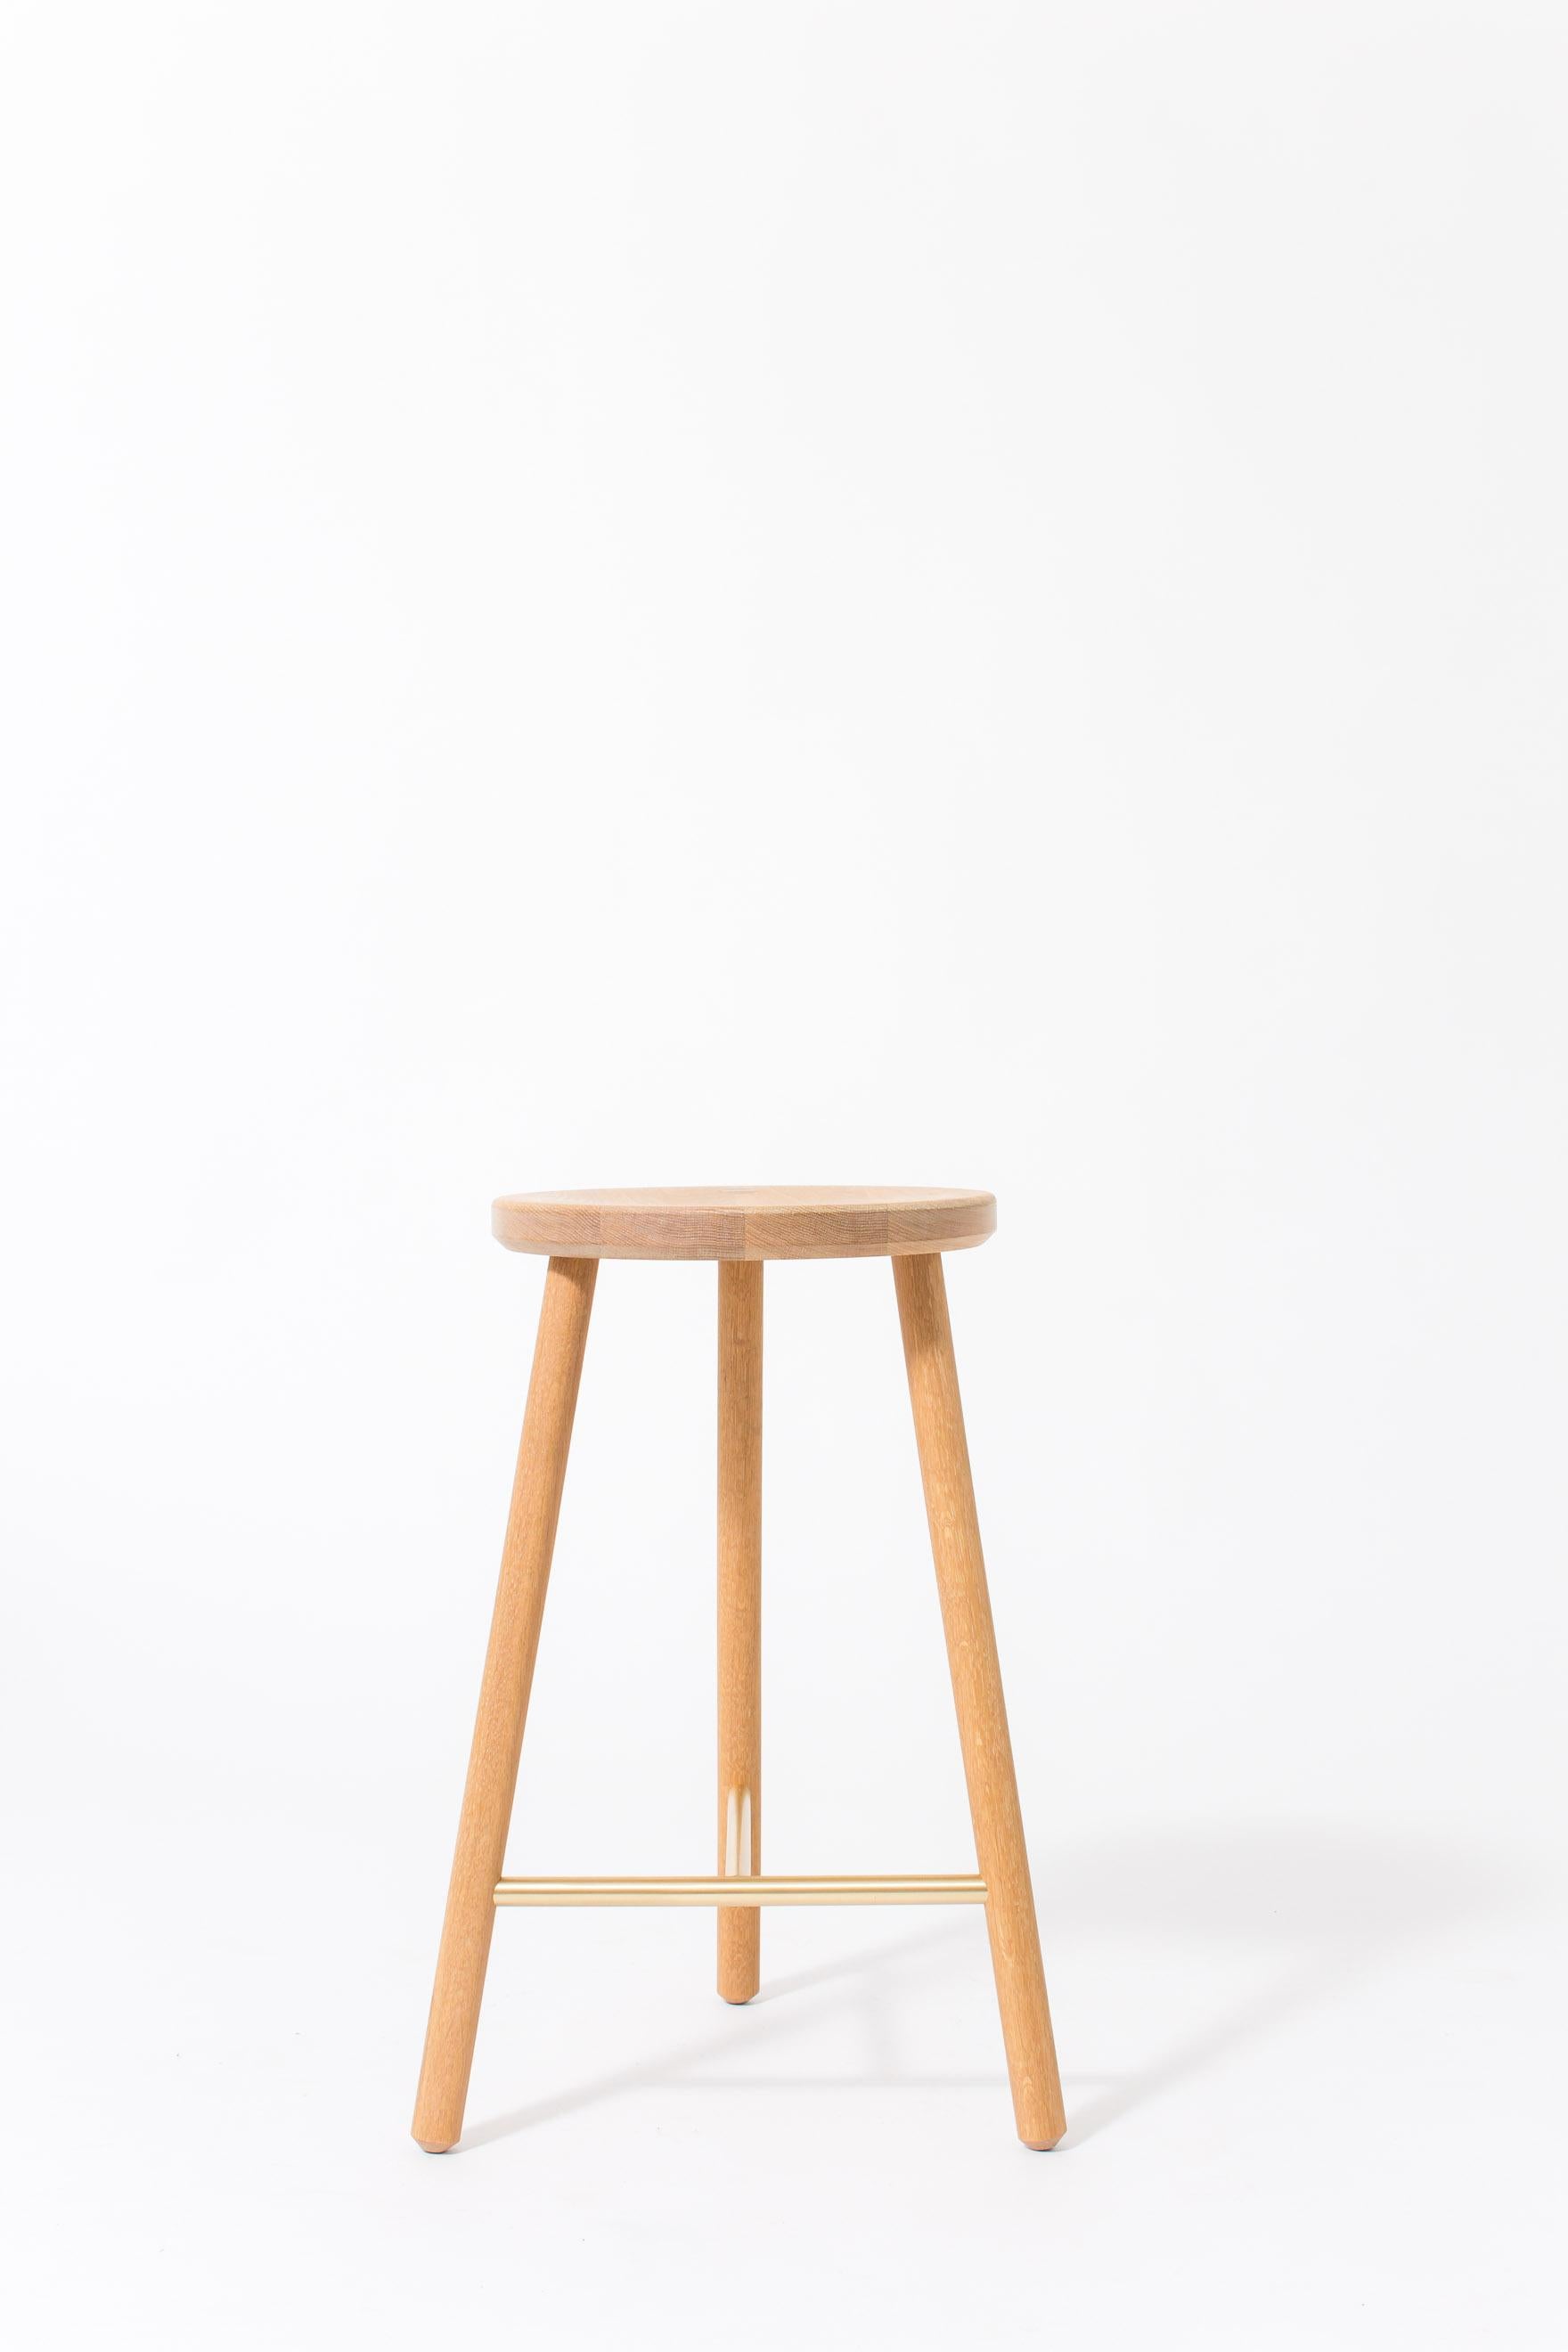 The scout stool has a slim design, allowing it to be tucked into small spaces with a minimal footprint.

Shown in Cerused white oak and satin brass. Domestic hardwood species available include white oak, walnut, maple or ash. Hand rubbed oil